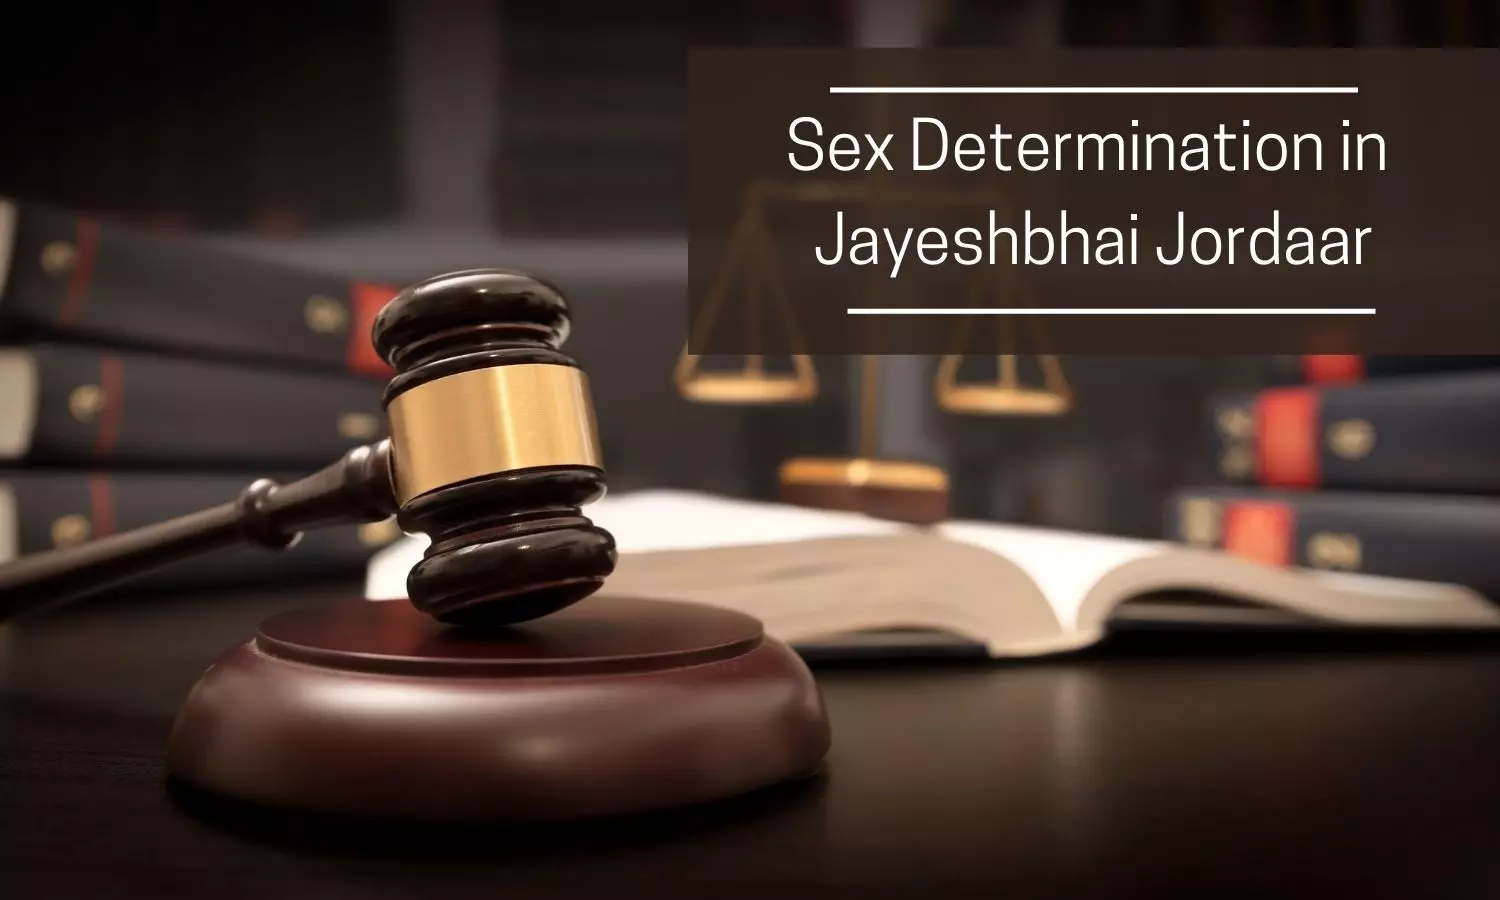 Plea in HC questions Sex Determination in Jayeshbhai Jordaar Film, Relevant Portions to be seen by Court